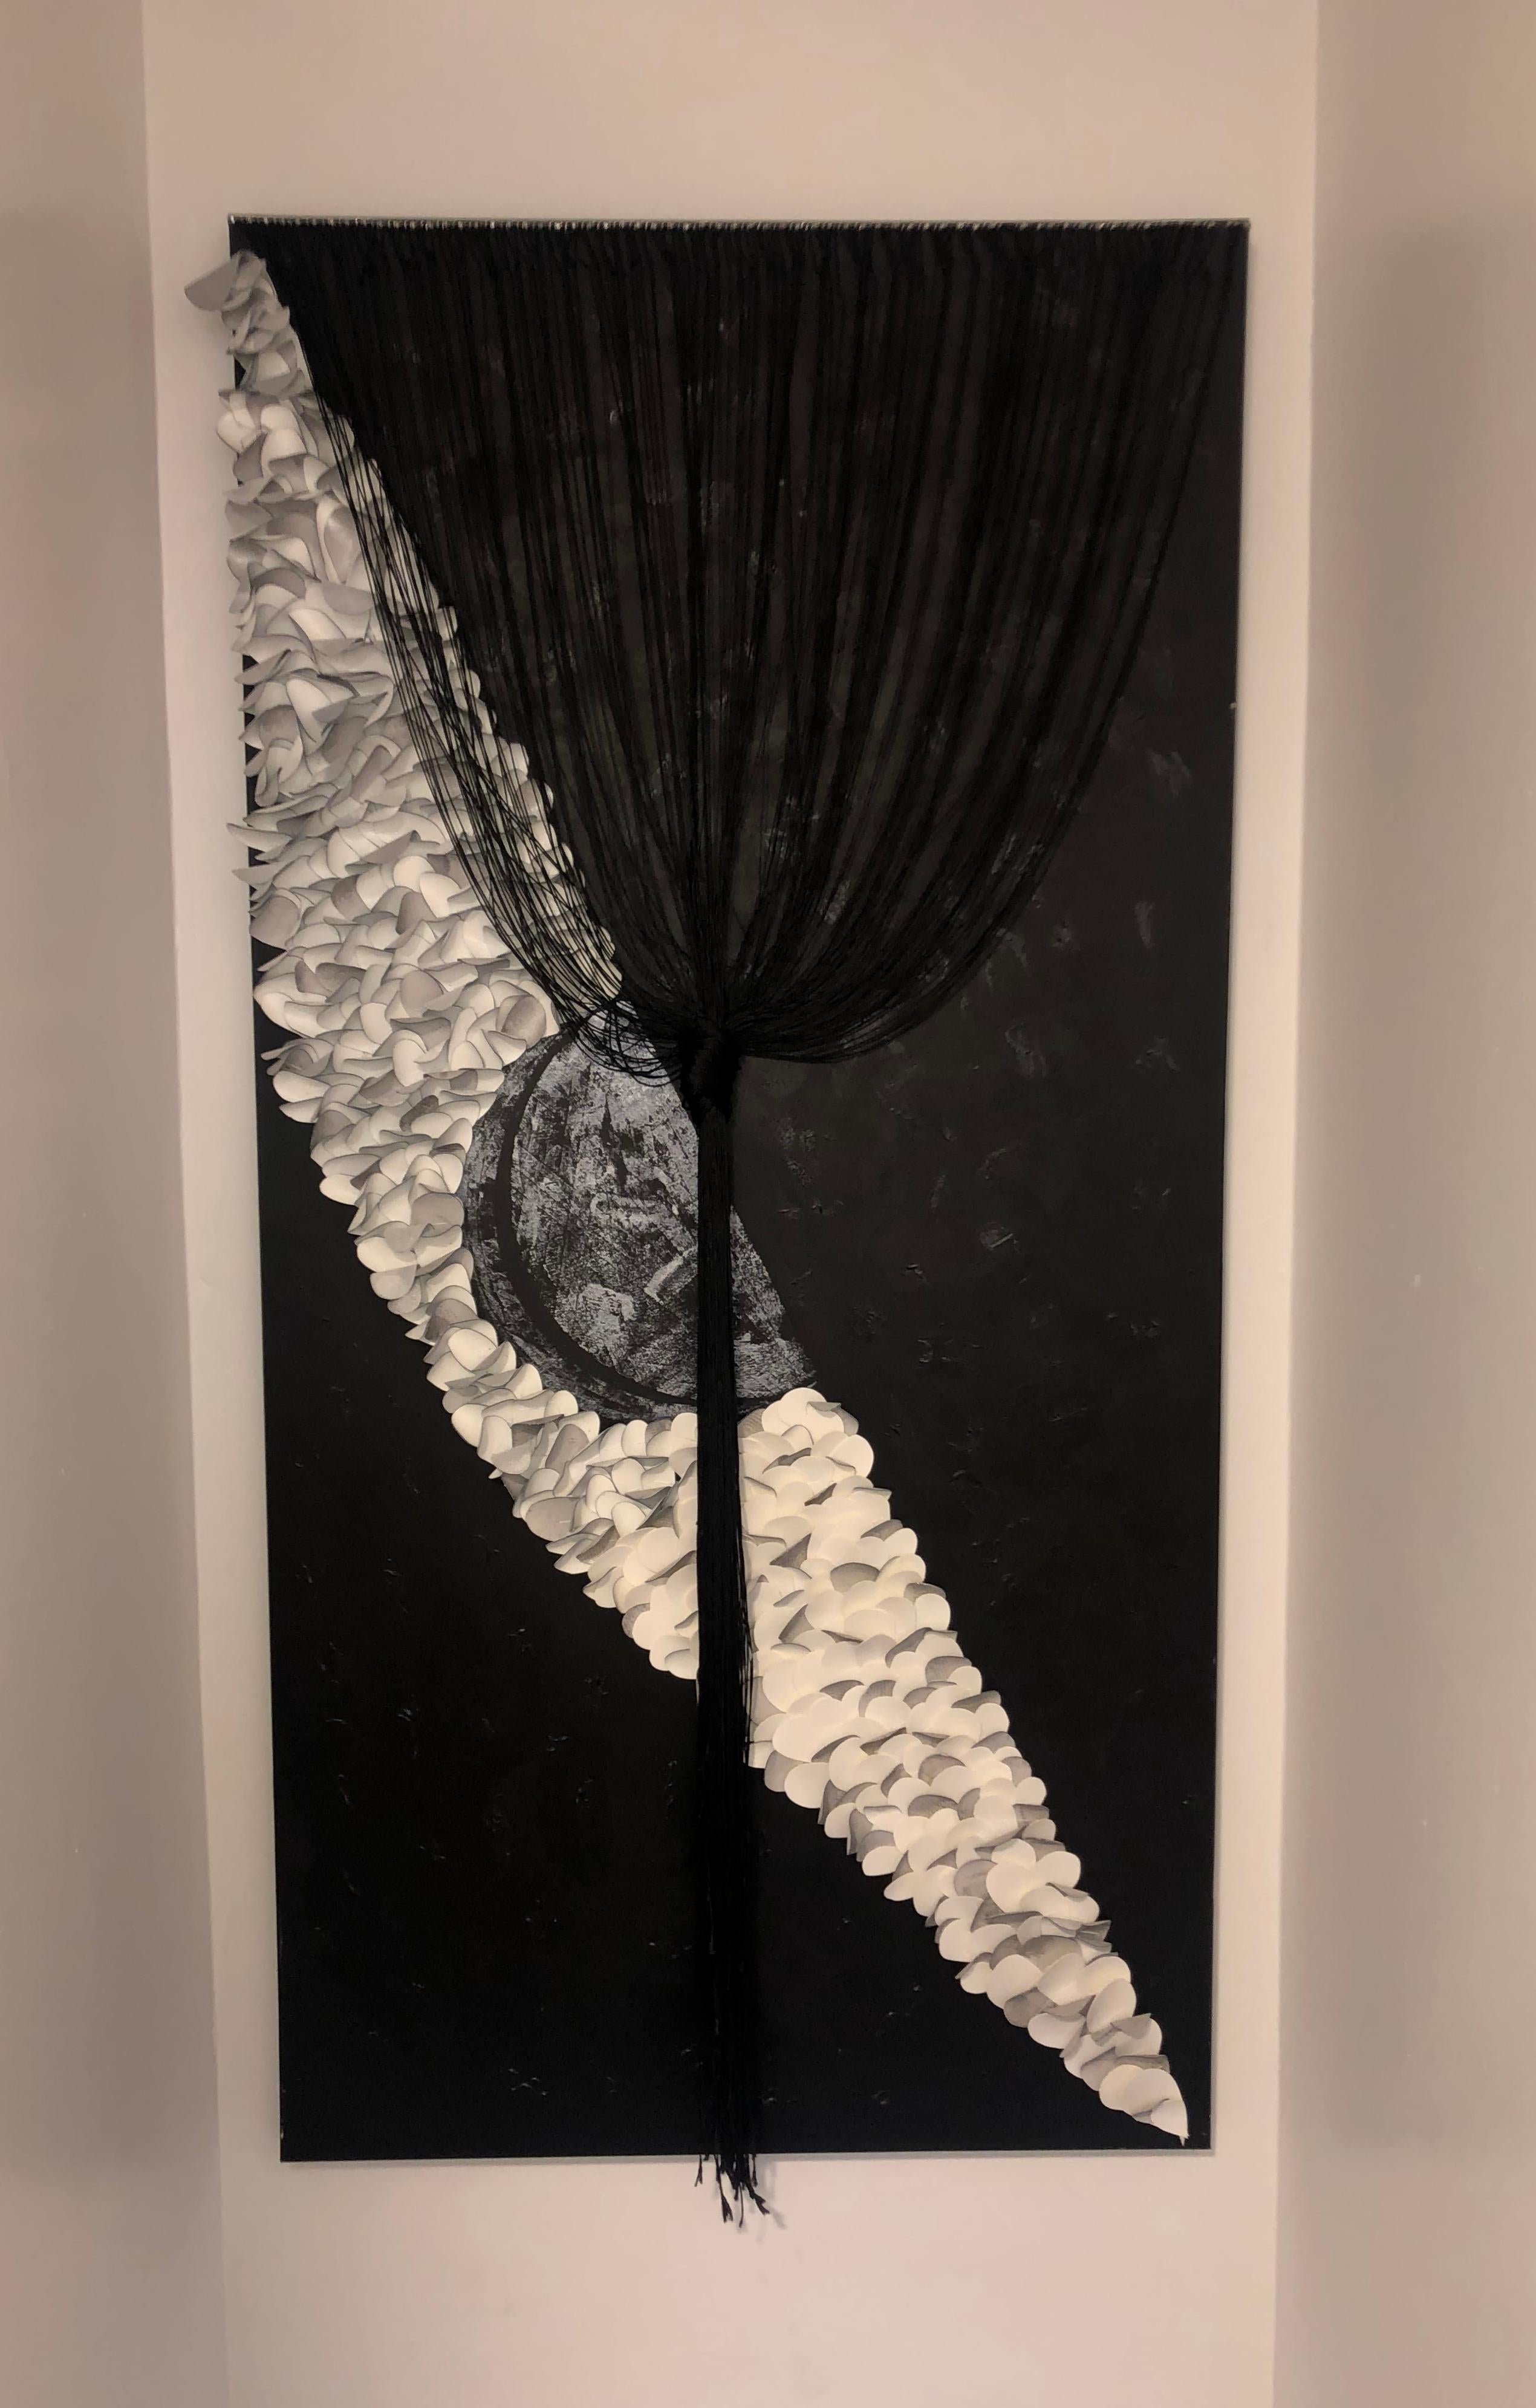 Acrylic on canvas, large abstract fashion painting. Black and white. Contemporary minimalism, geometric abstraction. Eco leather and thread. 
Signed with the artist's initials on the side. 
Toni Erm is a contemporary minimalist based in New York,